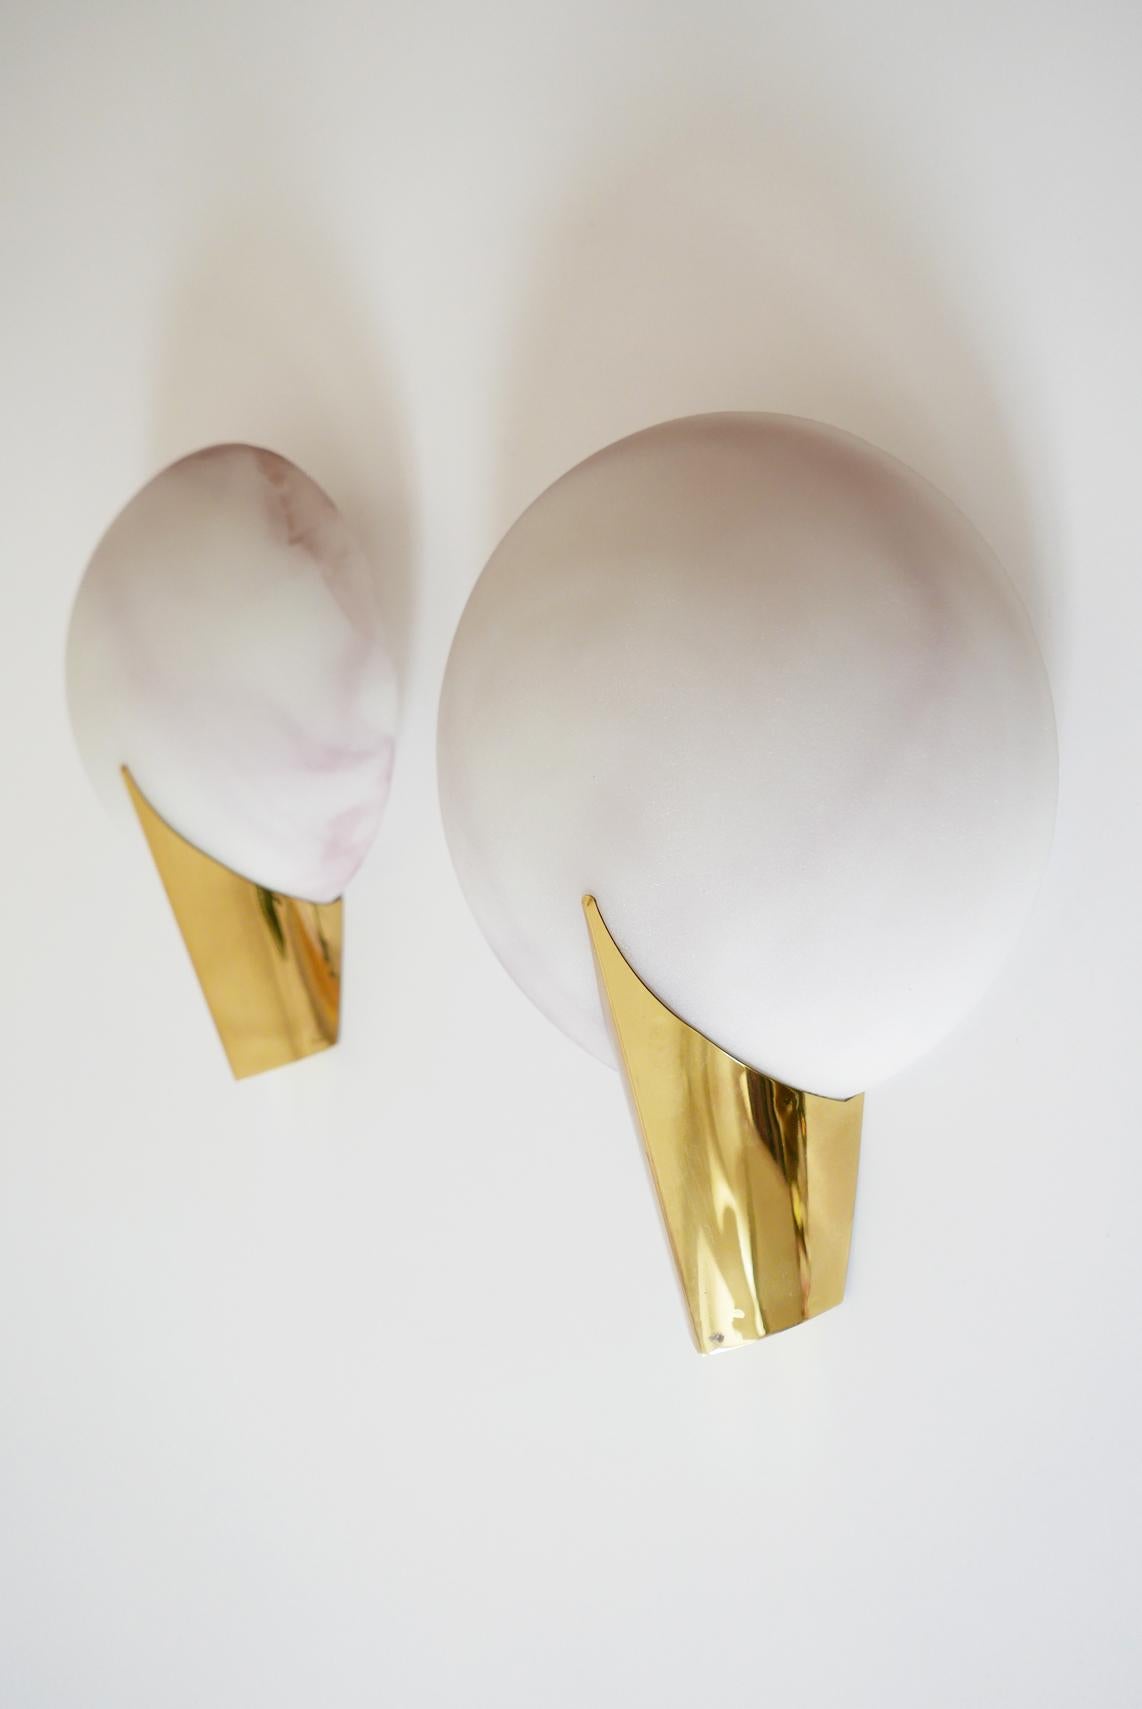 Glass Set of Two Elegant Modernist Wall Lamps or Sconces by J.T. Kalmar, 1980s Austria For Sale